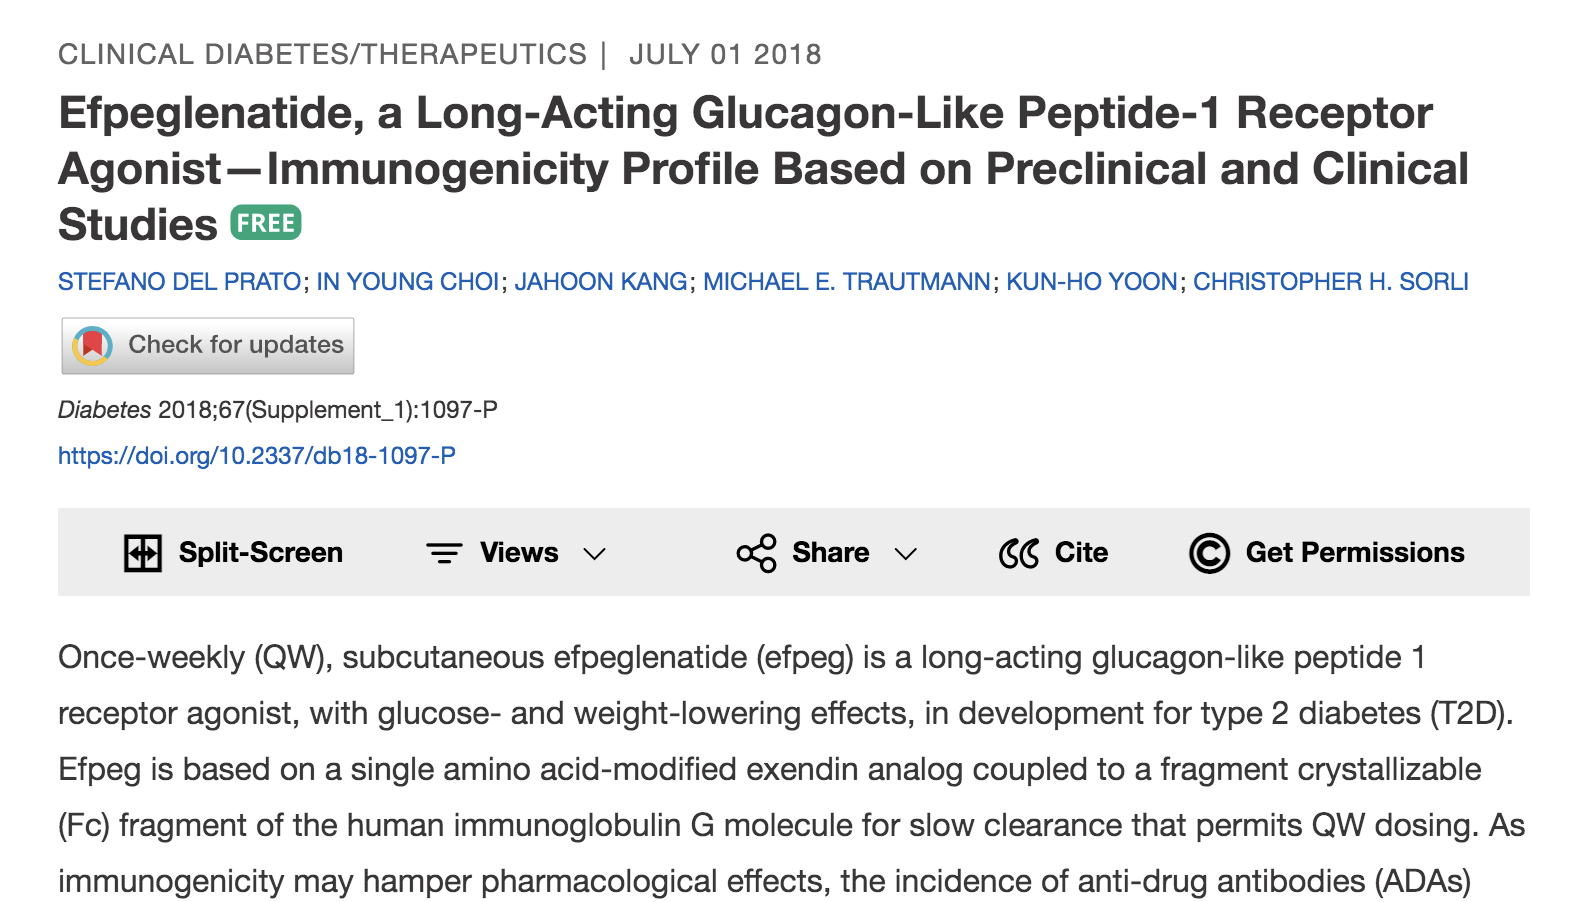 Efpeglenatide, a Long-Acting Glucagon-Like Peptide-1 Receptor Agonist—Immunogenicity Profile Based on Preclinical and Clinical Studies thumbnail